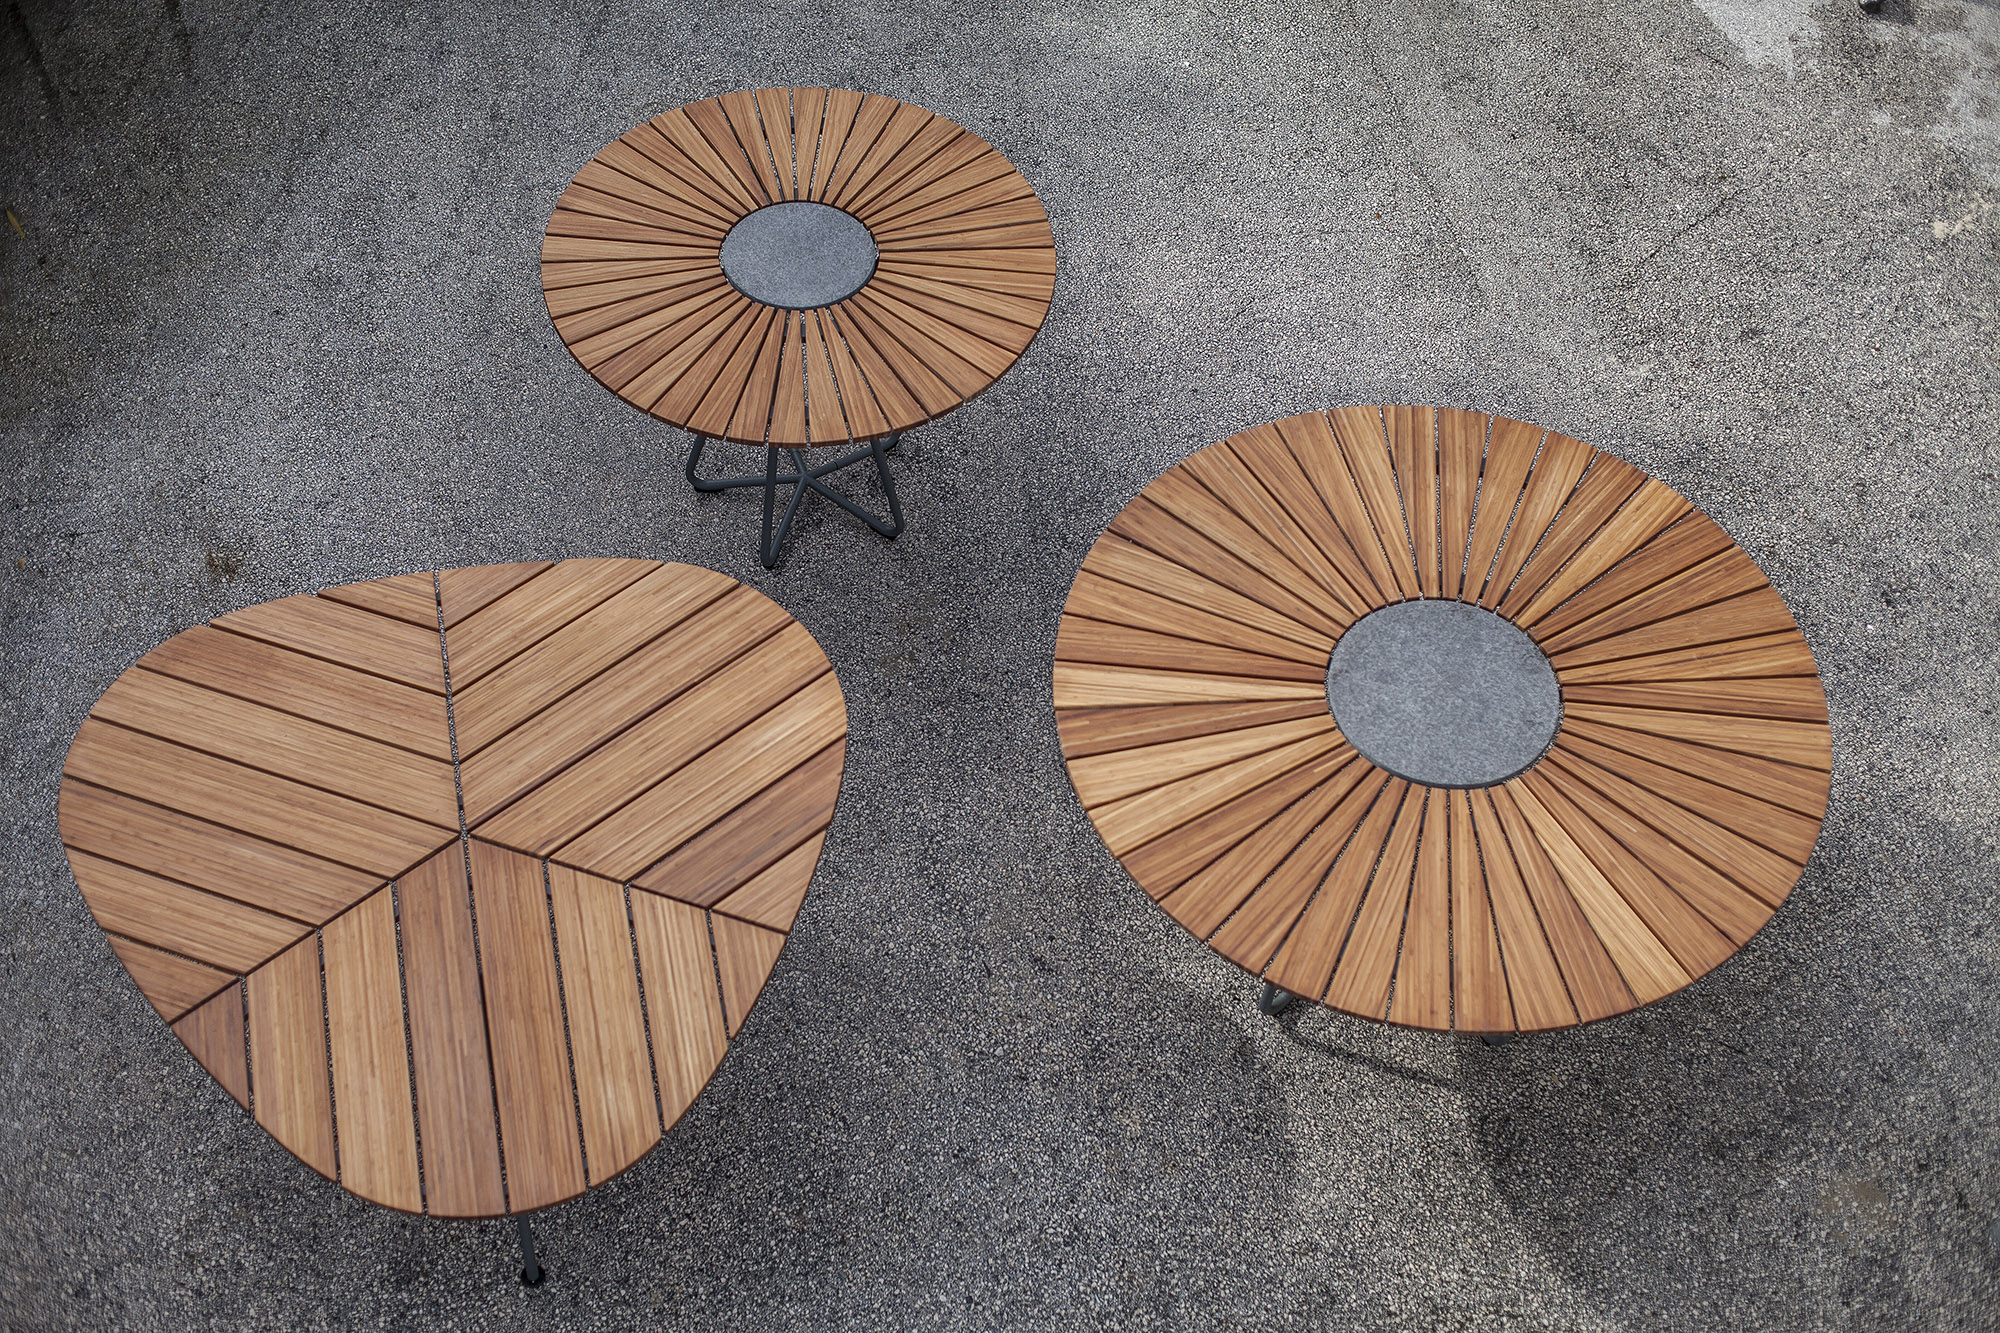 Houe - Circle Outdoor Dining Table